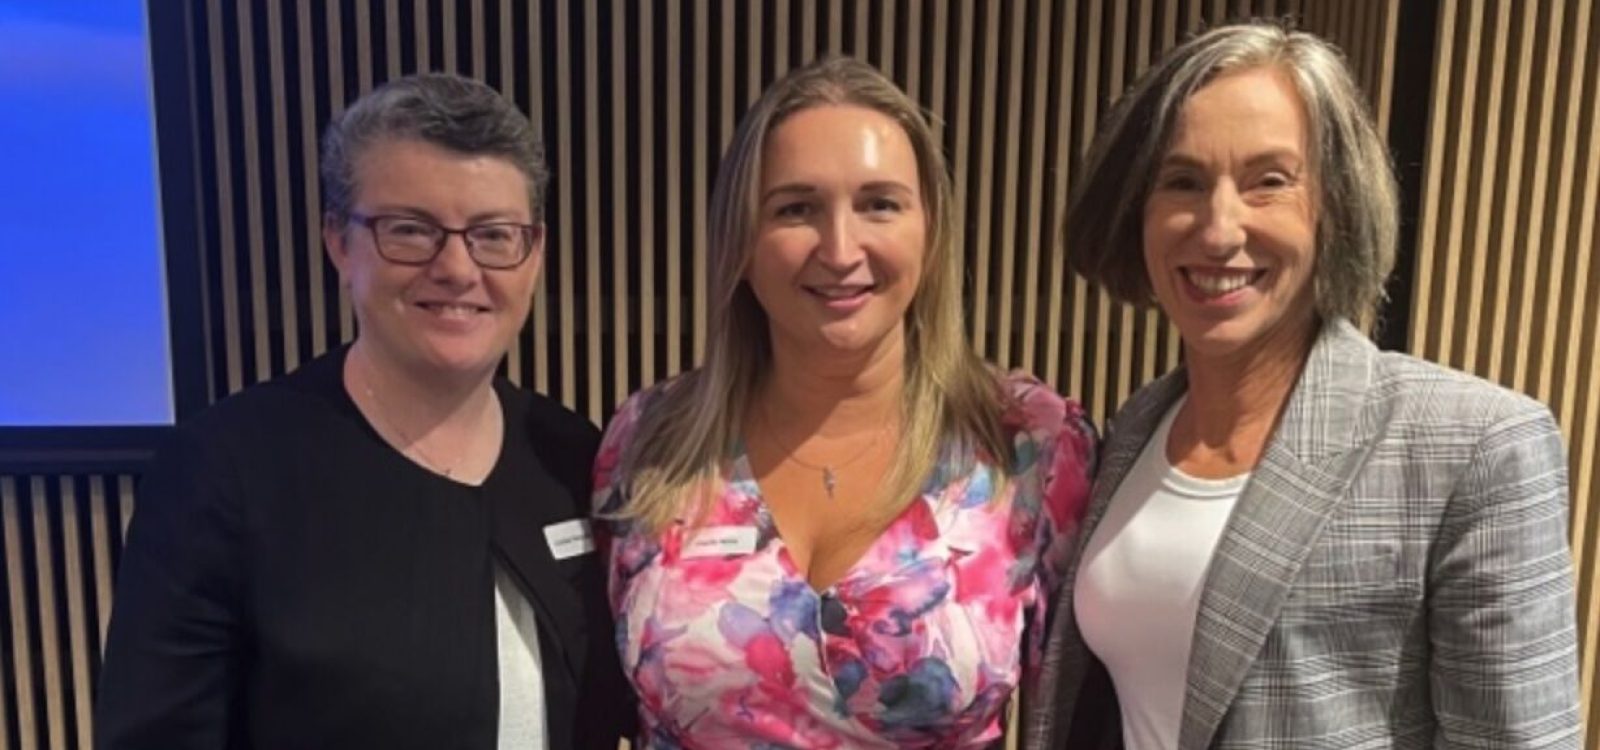 International Women’s Day: Cracking the Code with President Naomi Edwards and guests Charlie Hales and Louise Petschler